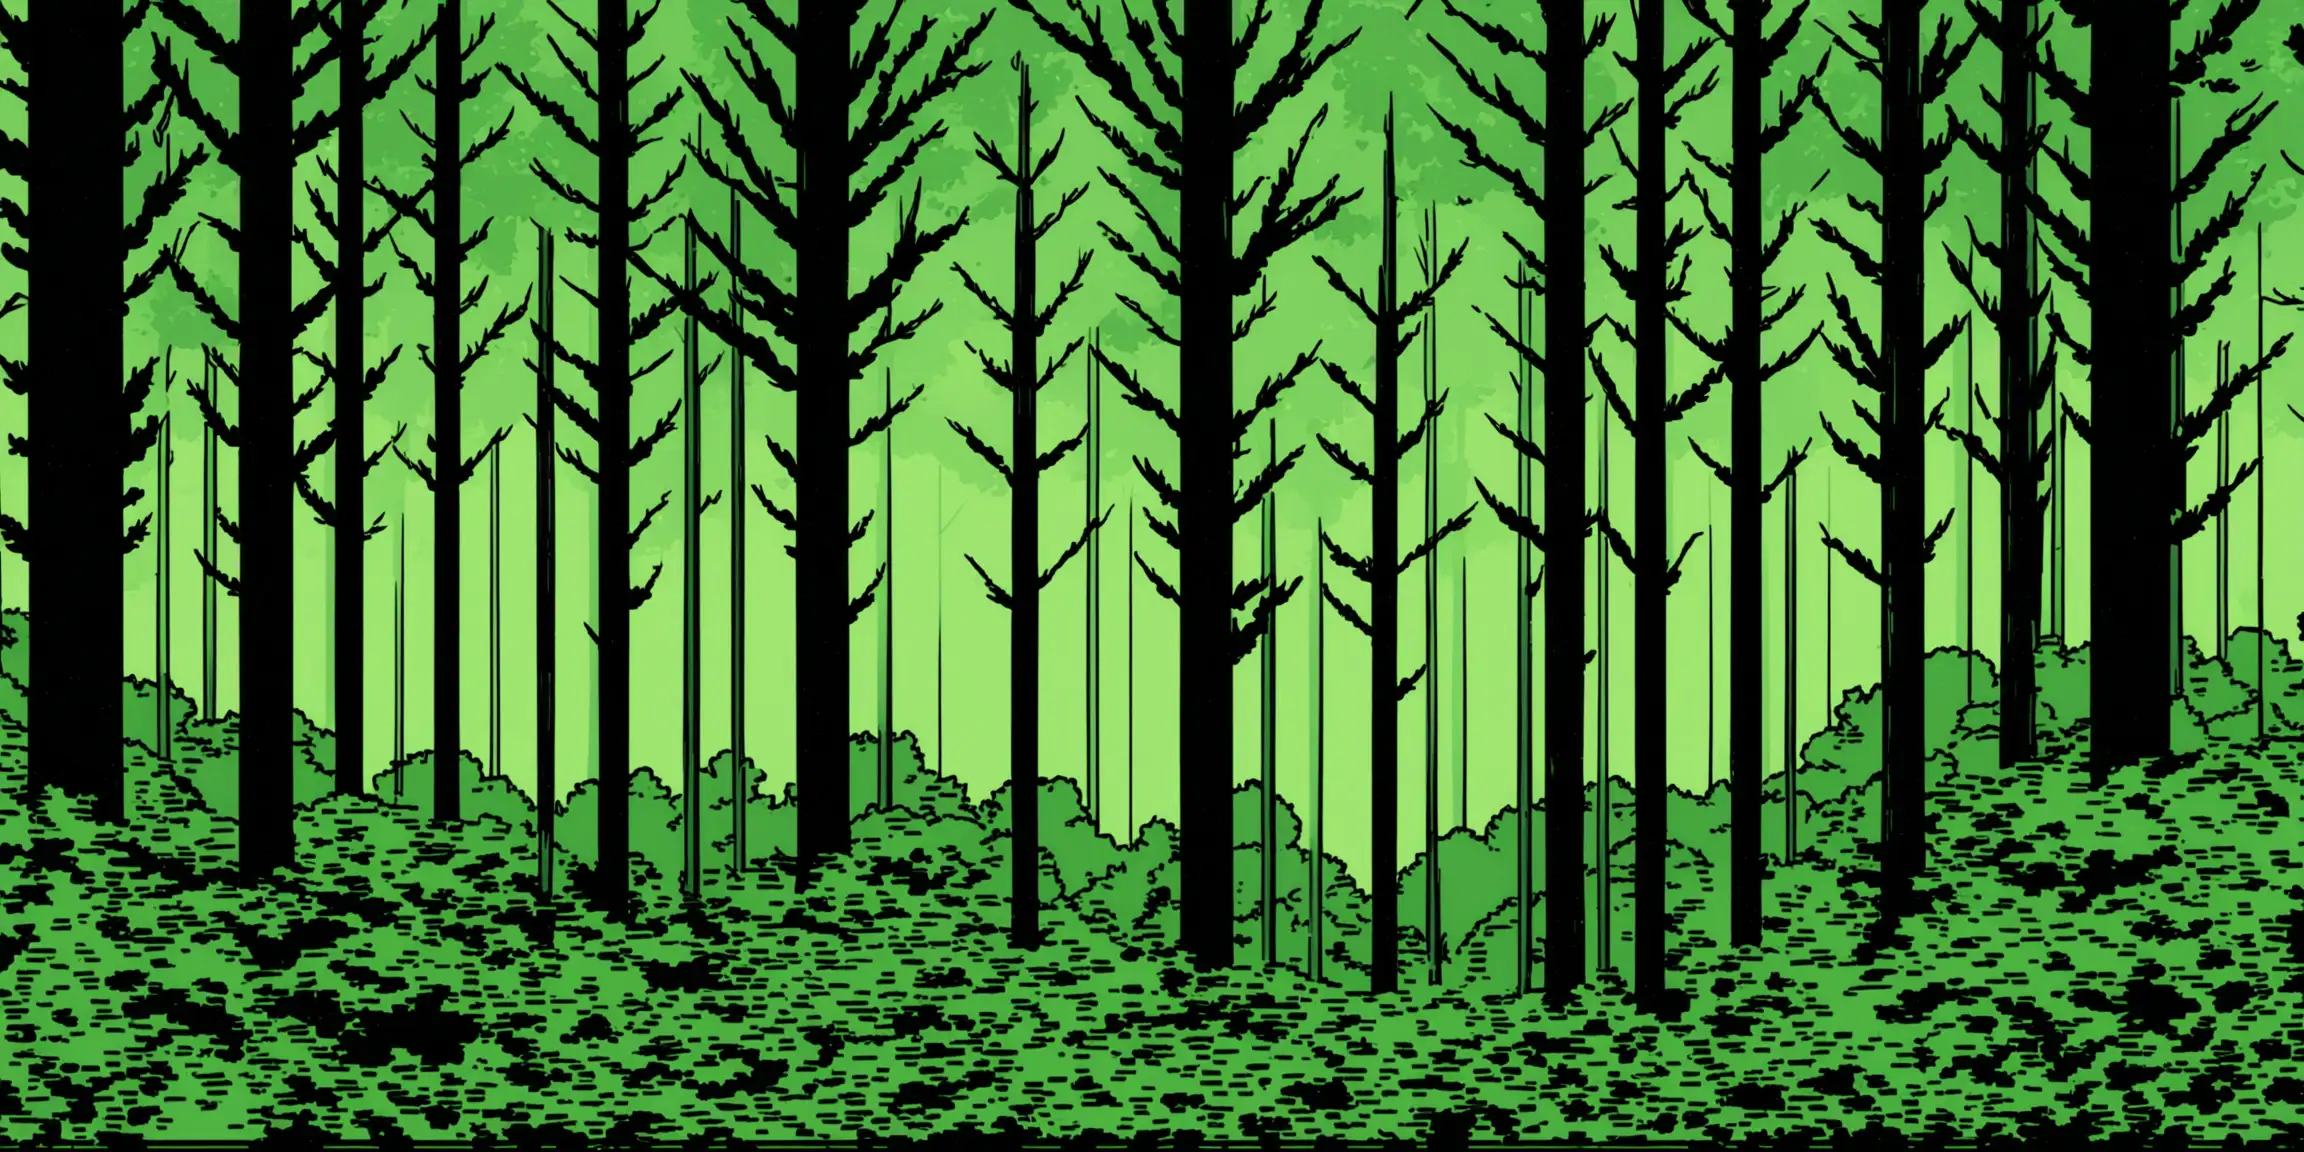 Comic book style:  A forest.  Flat profile